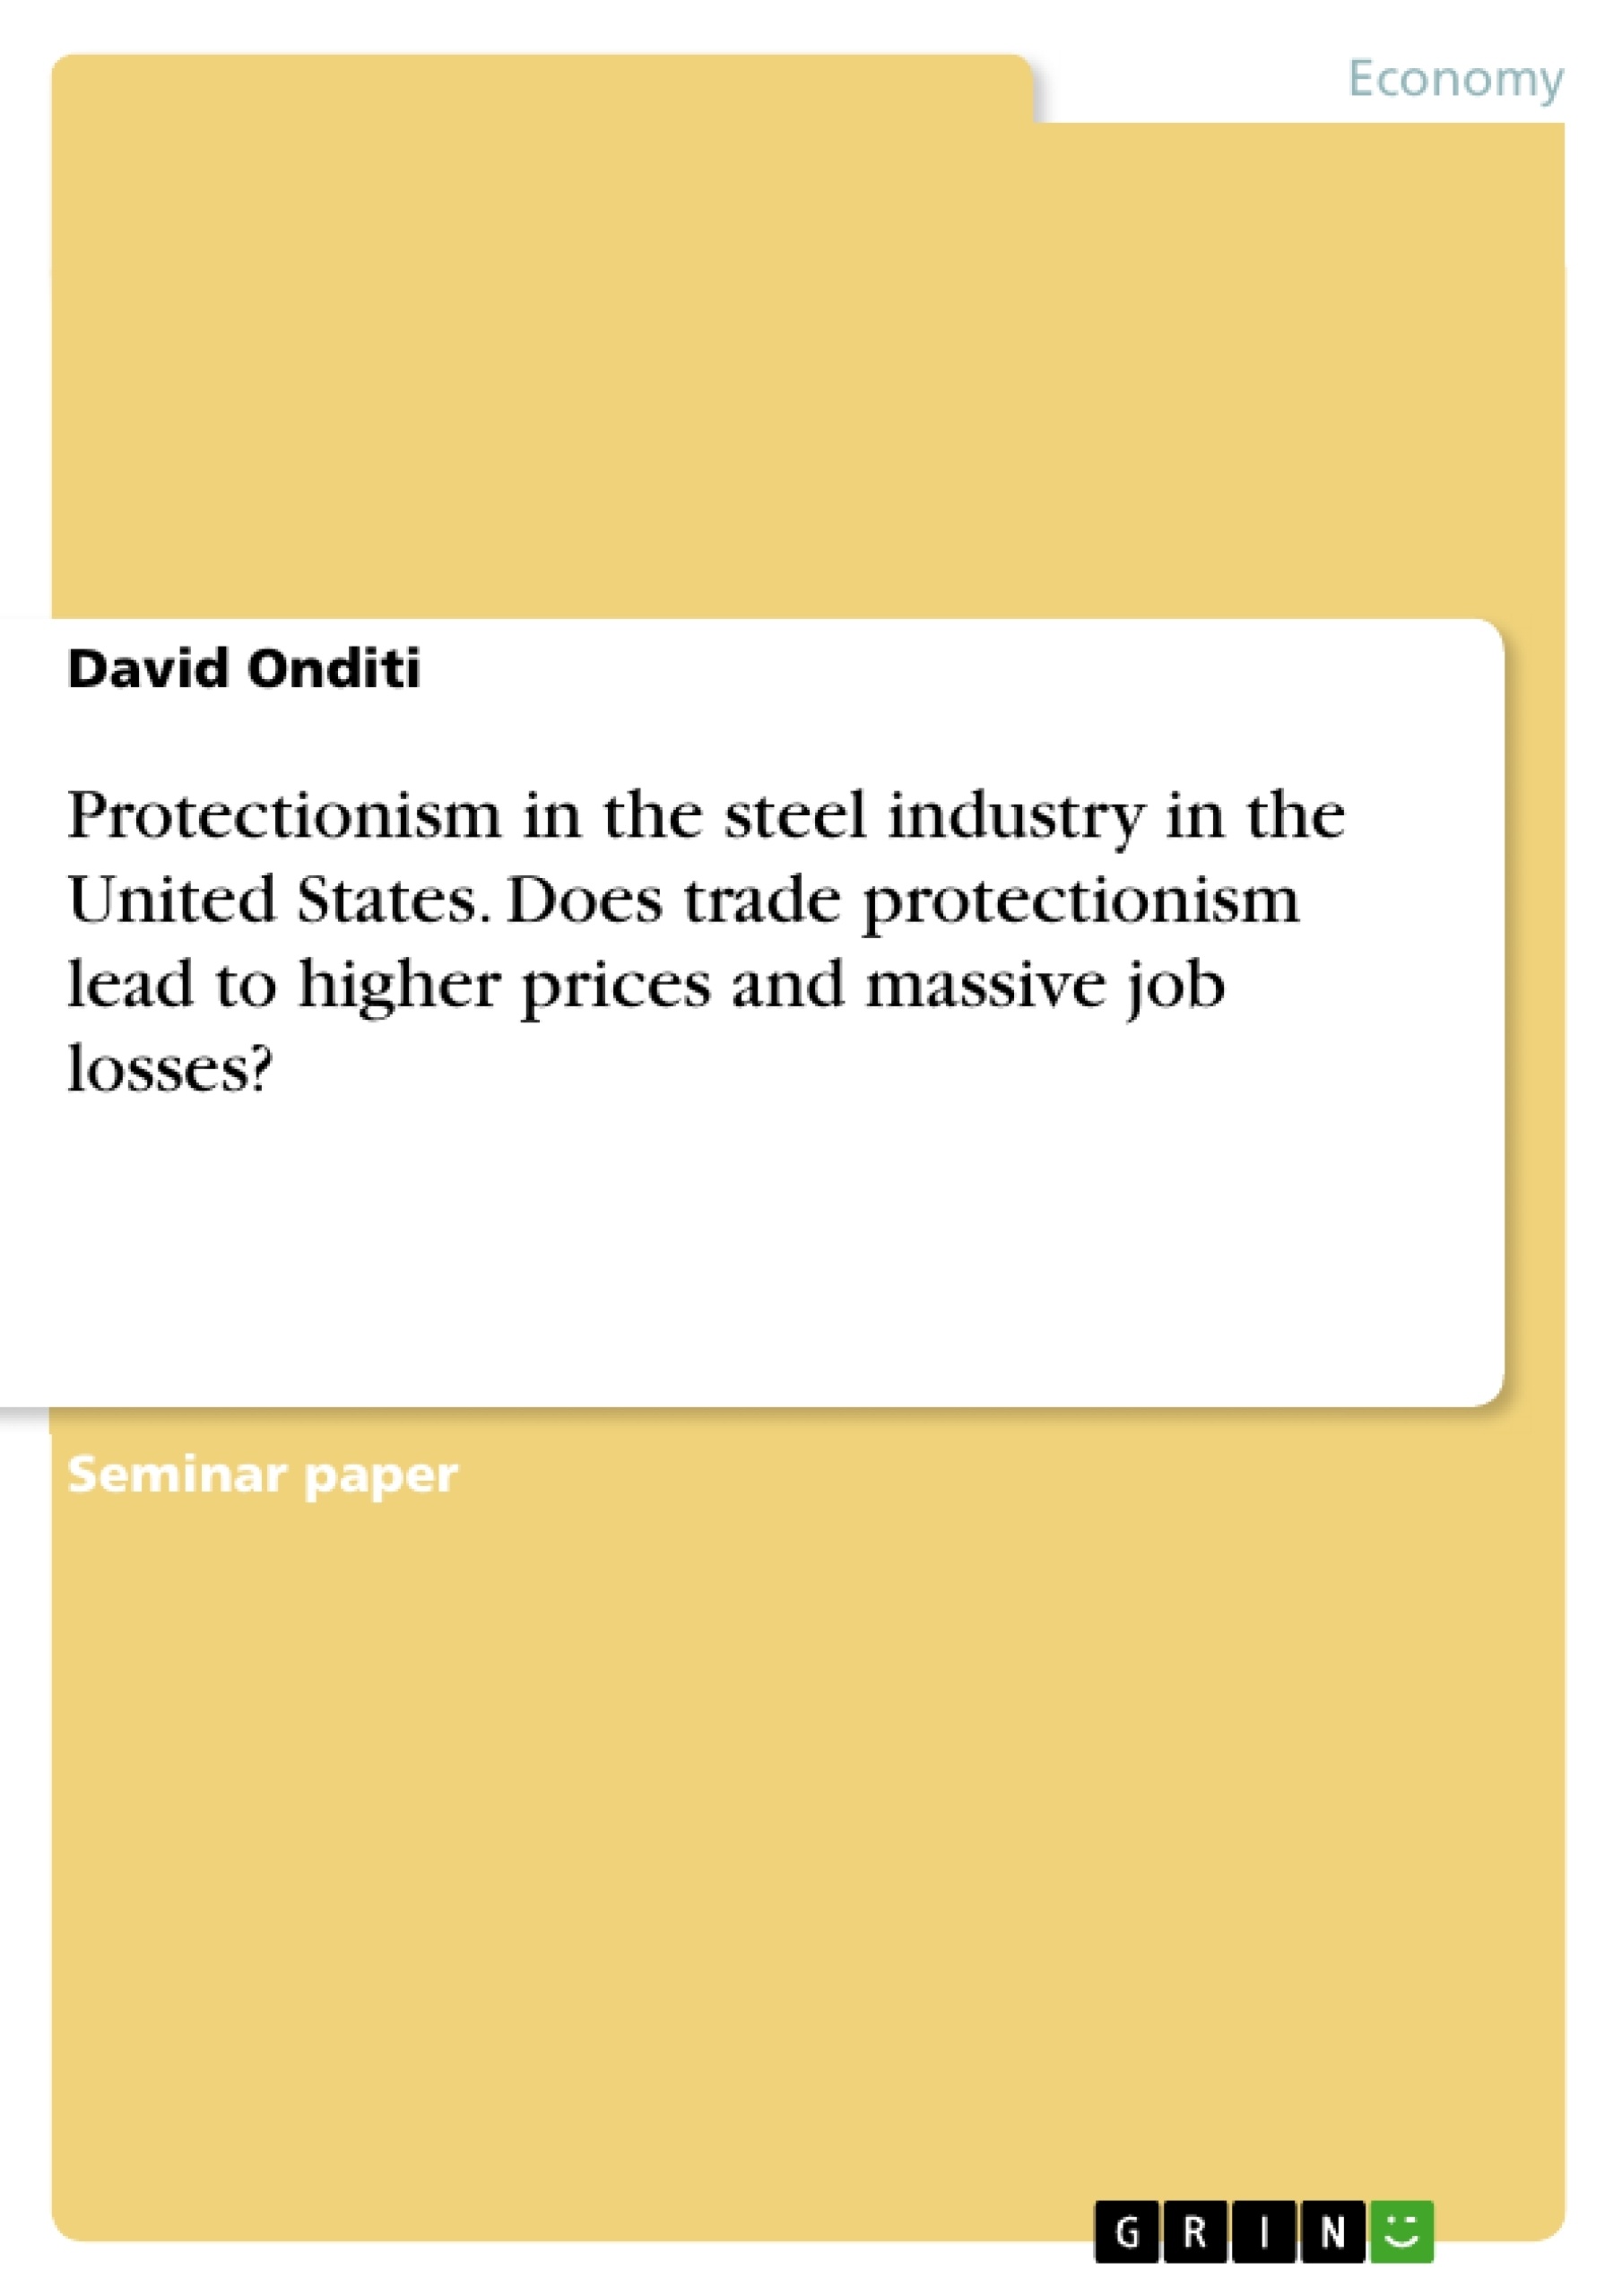 Titre: Protectionism in the steel industry in the United States. Does trade protectionism lead to higher prices and massive job losses?